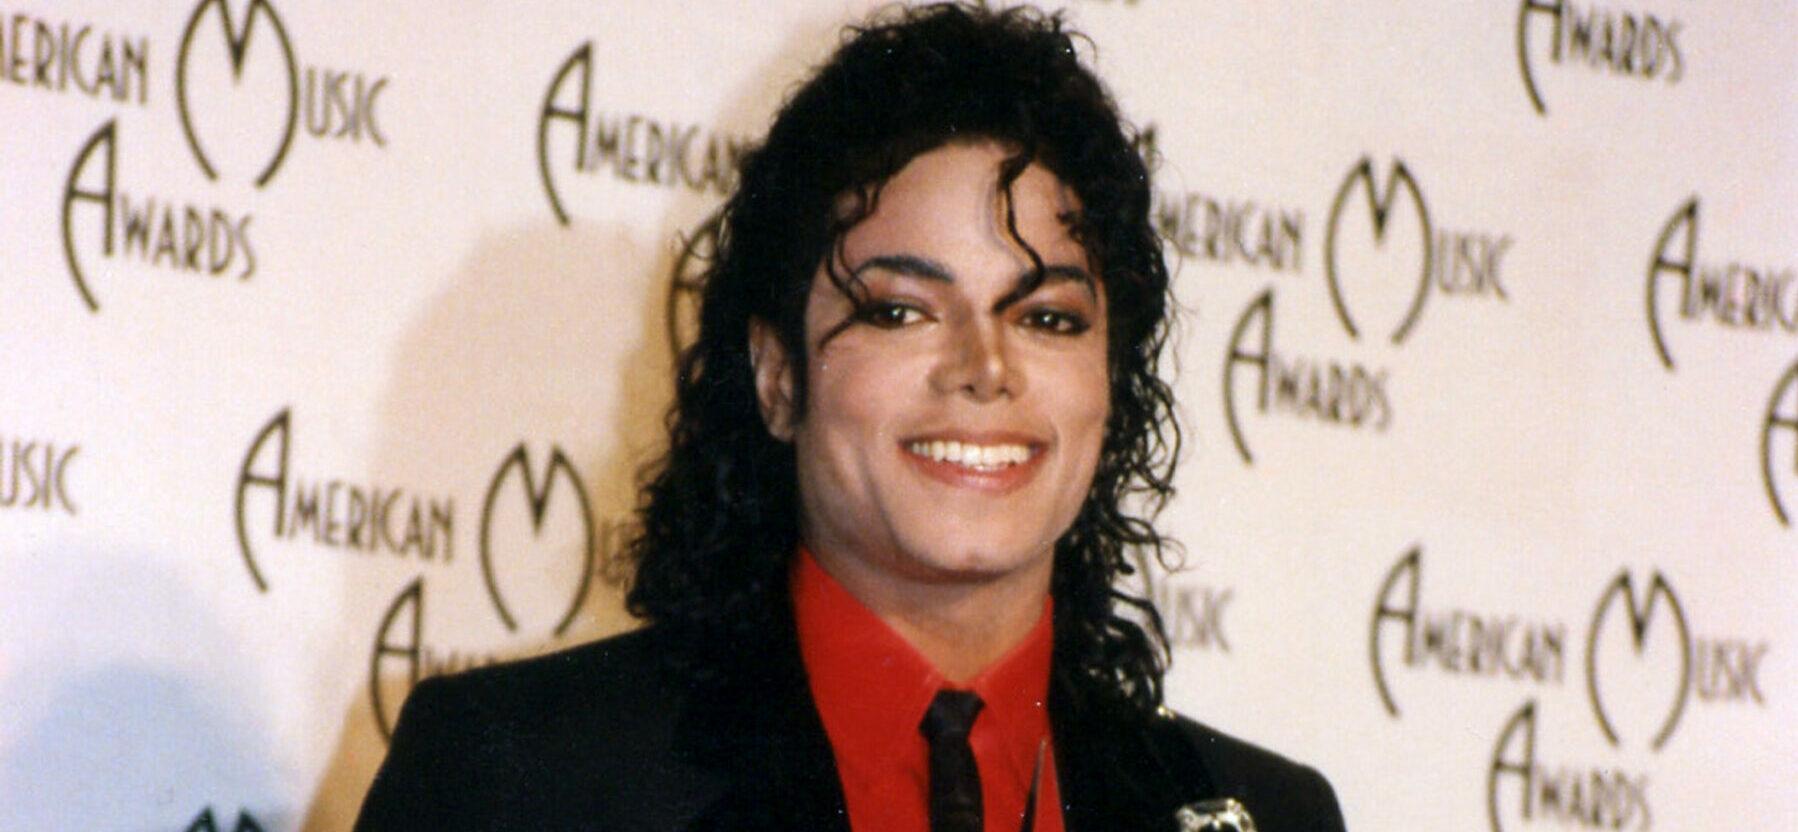 Michael Jackson Went Two Months Without Real Sleep Before He Died